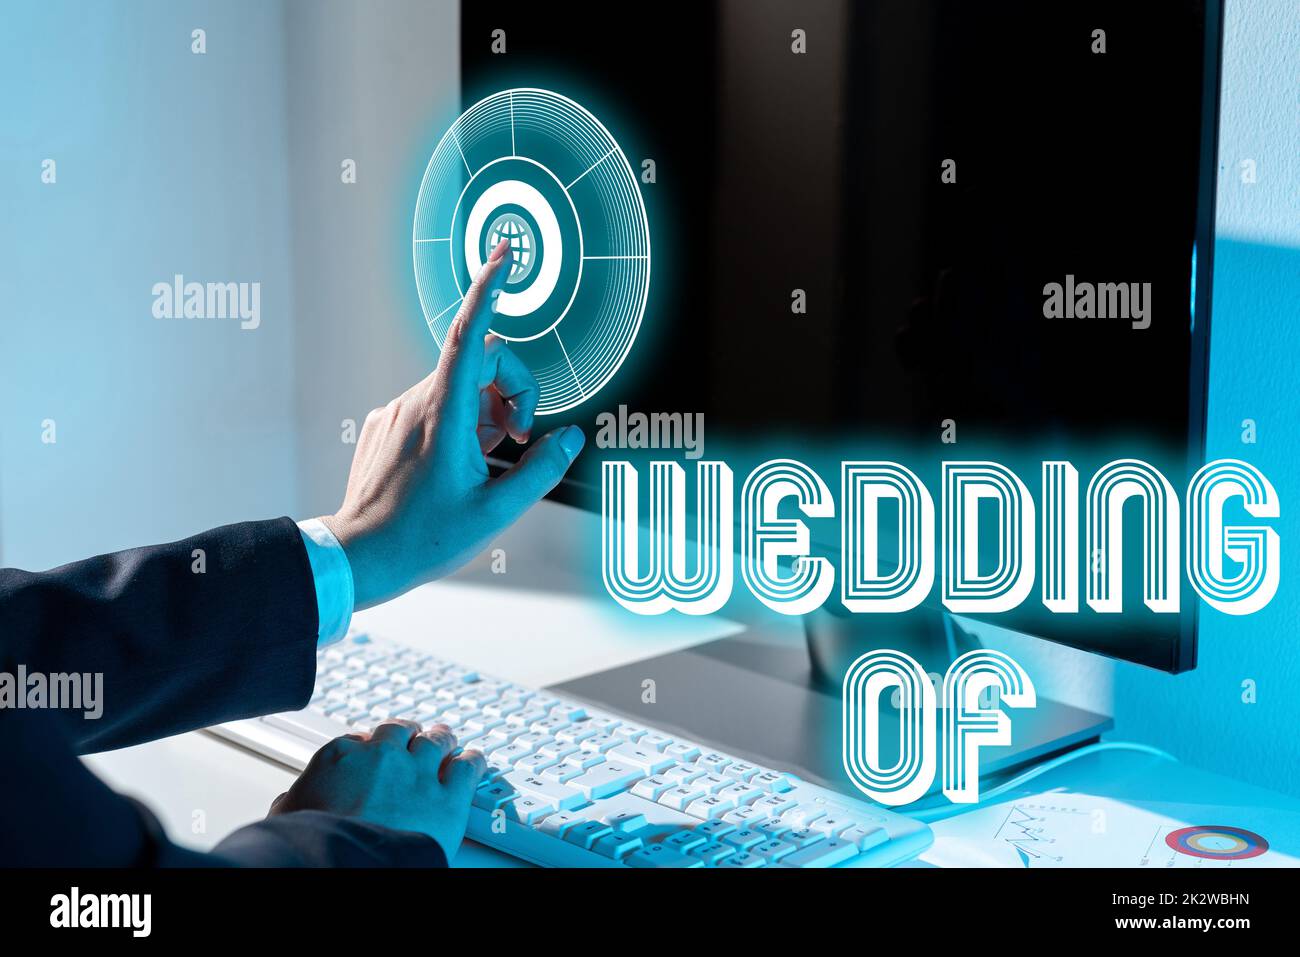 Text showing inspiration Wedding Of. Business overview announcing that man and now as married couple forever -47430 Stock Photo